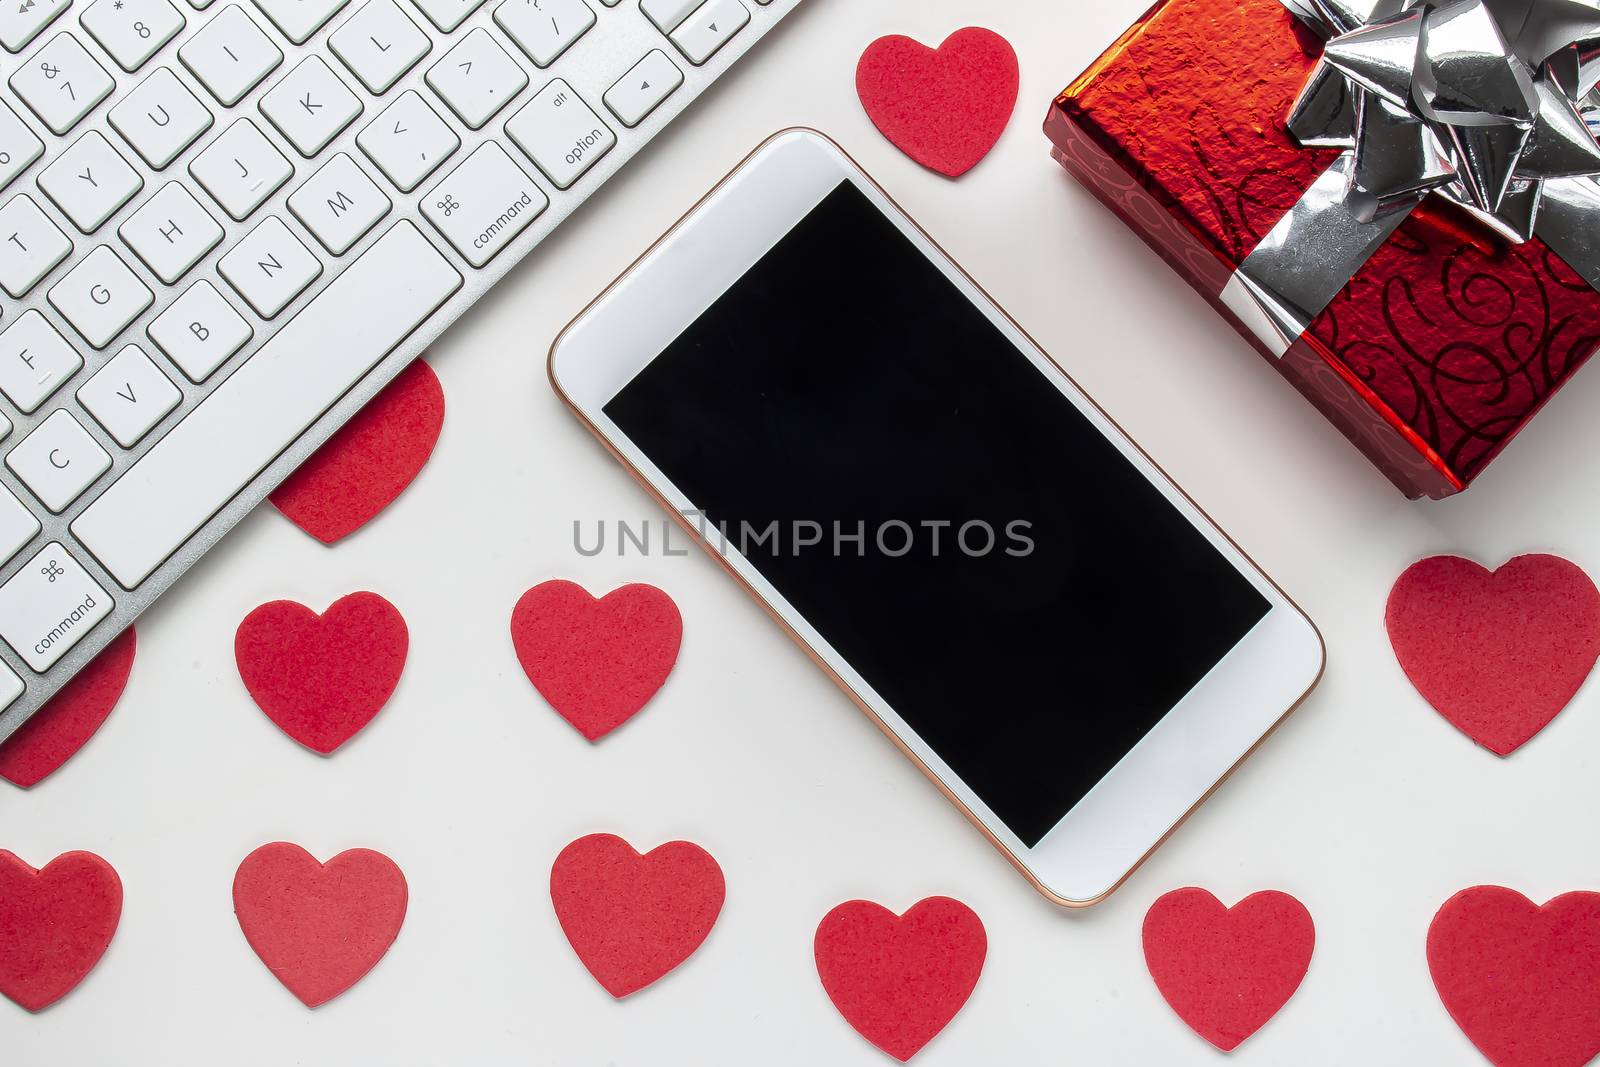 A smartphone with a keyboard and a red present and red hearts on a white background